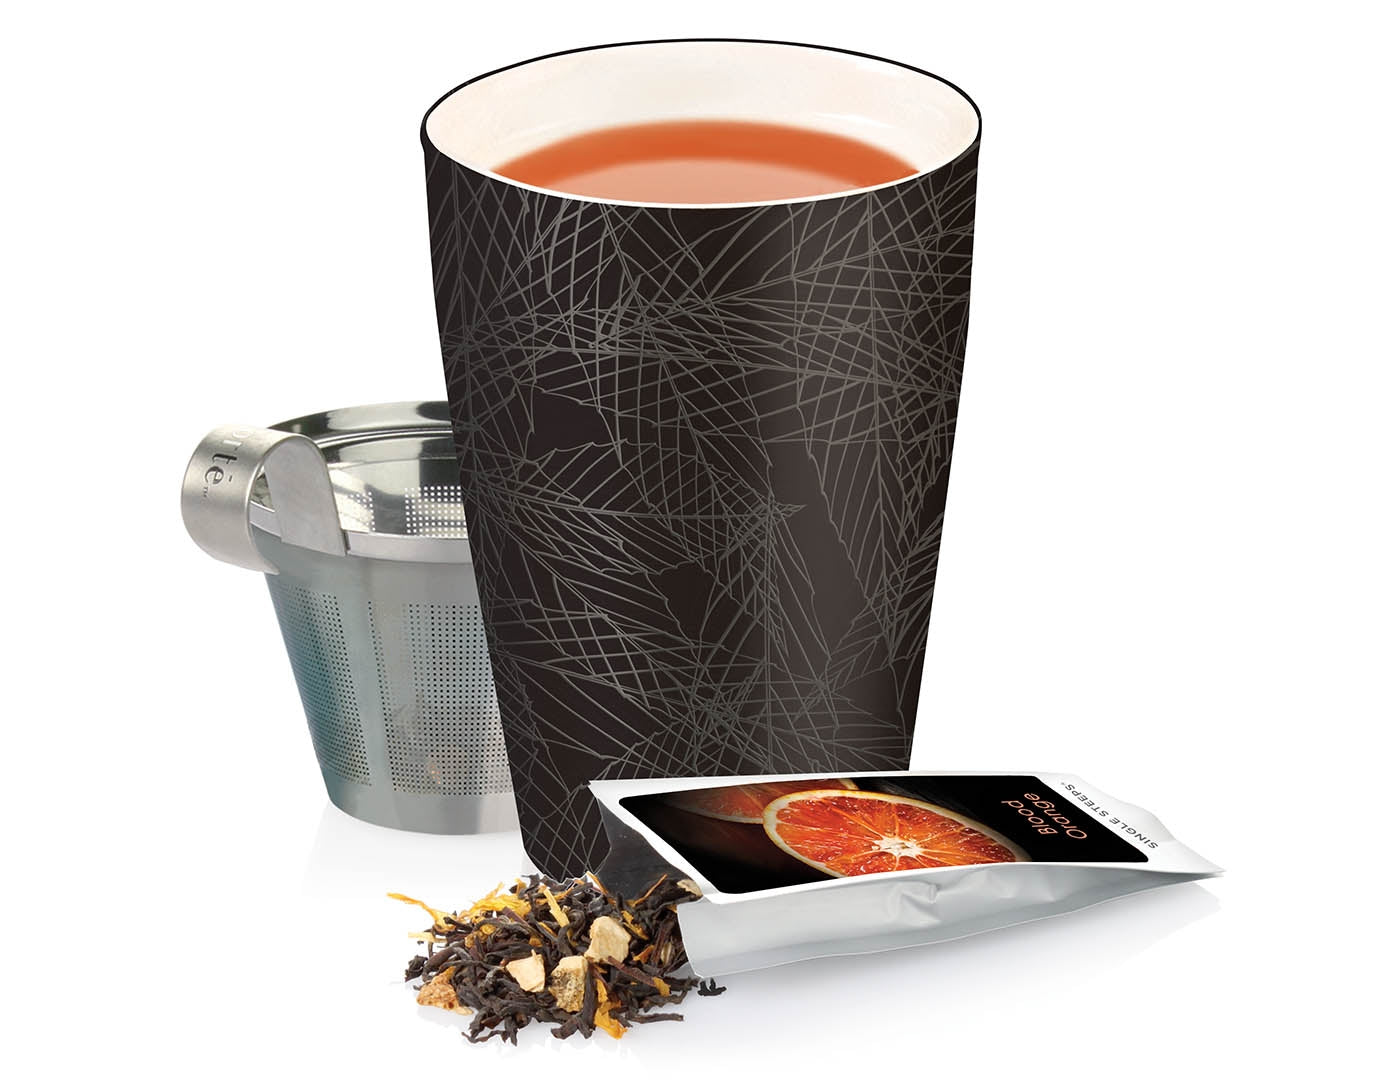 Noir design KATI® Steeping cup with infuser showing closeup of cup